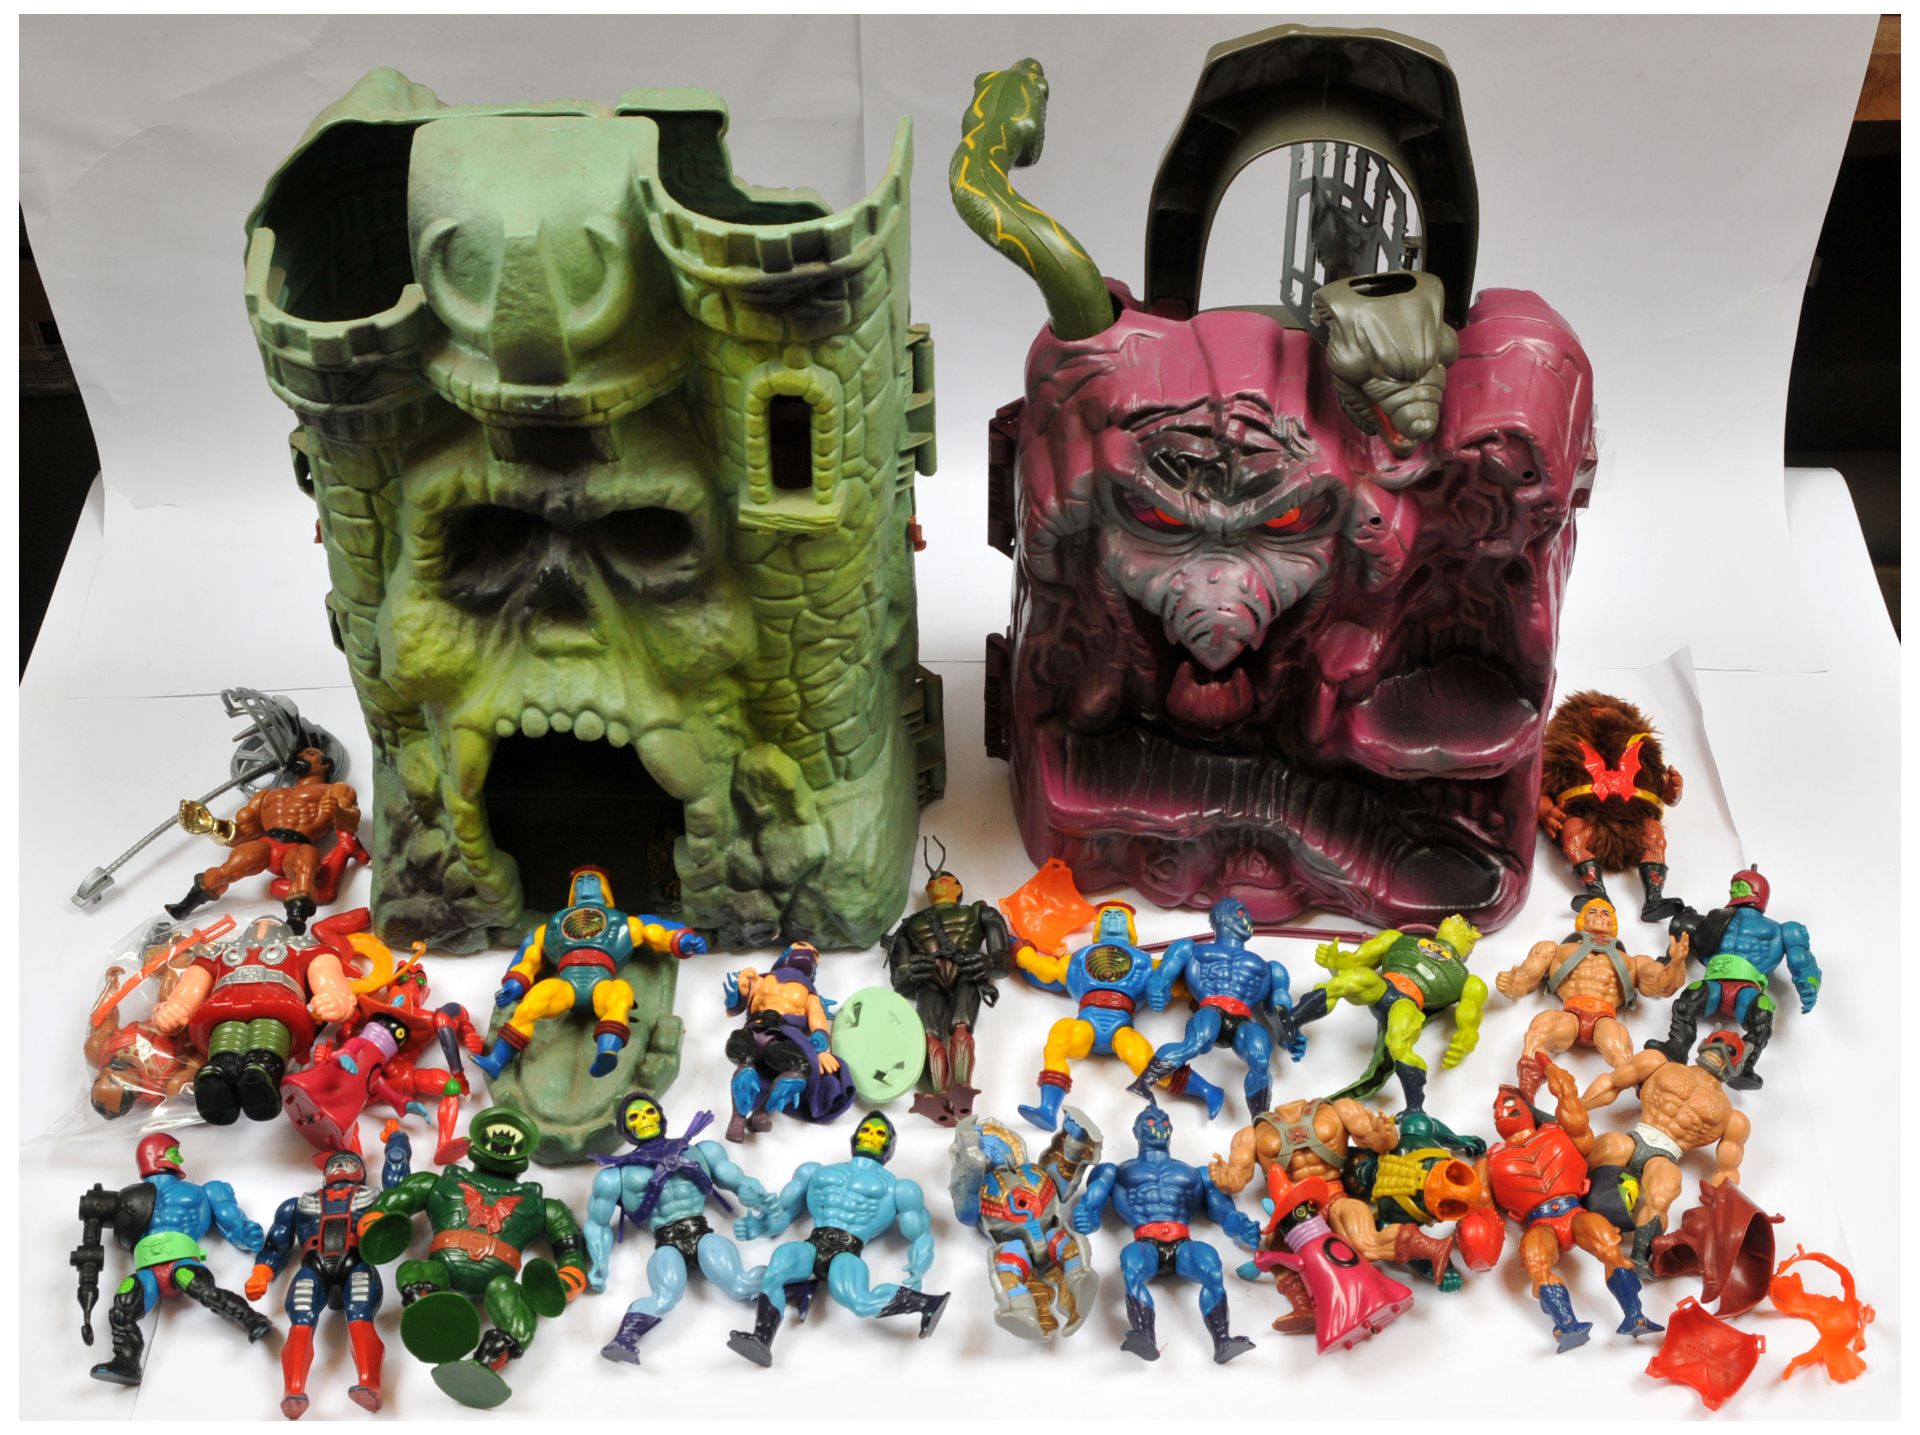 Quantity of Mattel Masters of the Universe Figures and Playsets